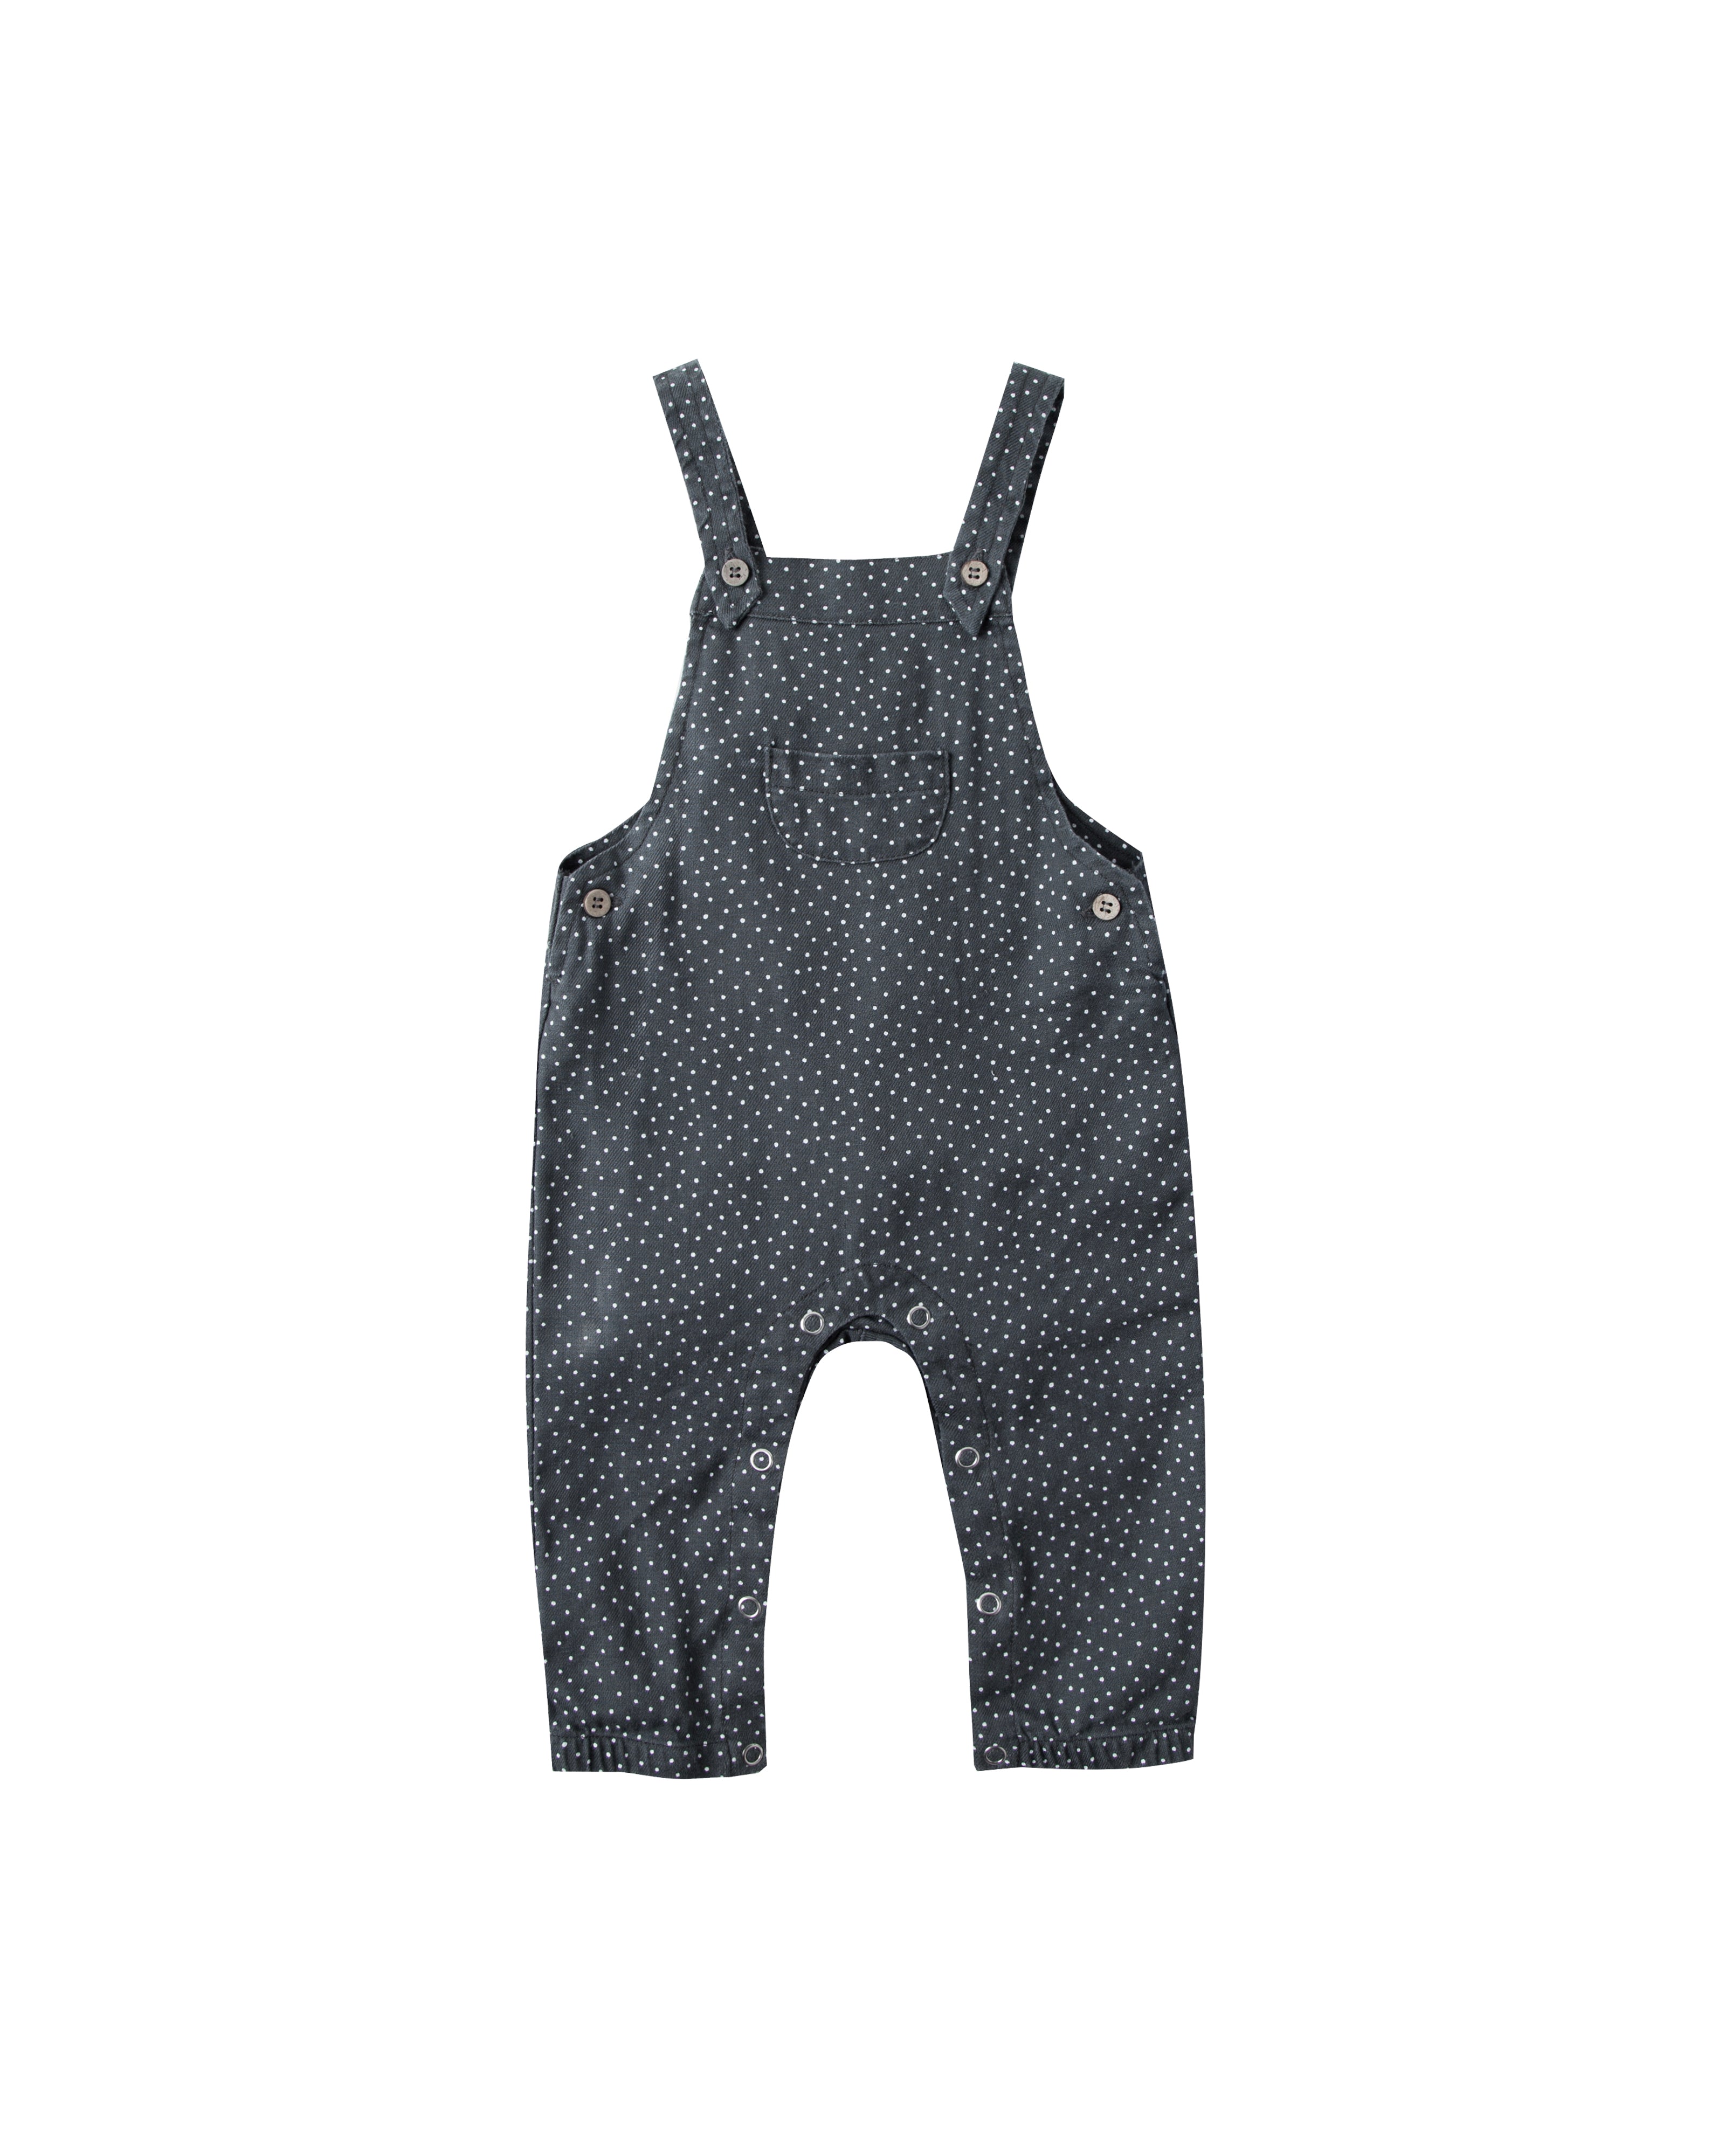 Rylee and Cru Baby Overall - Dots